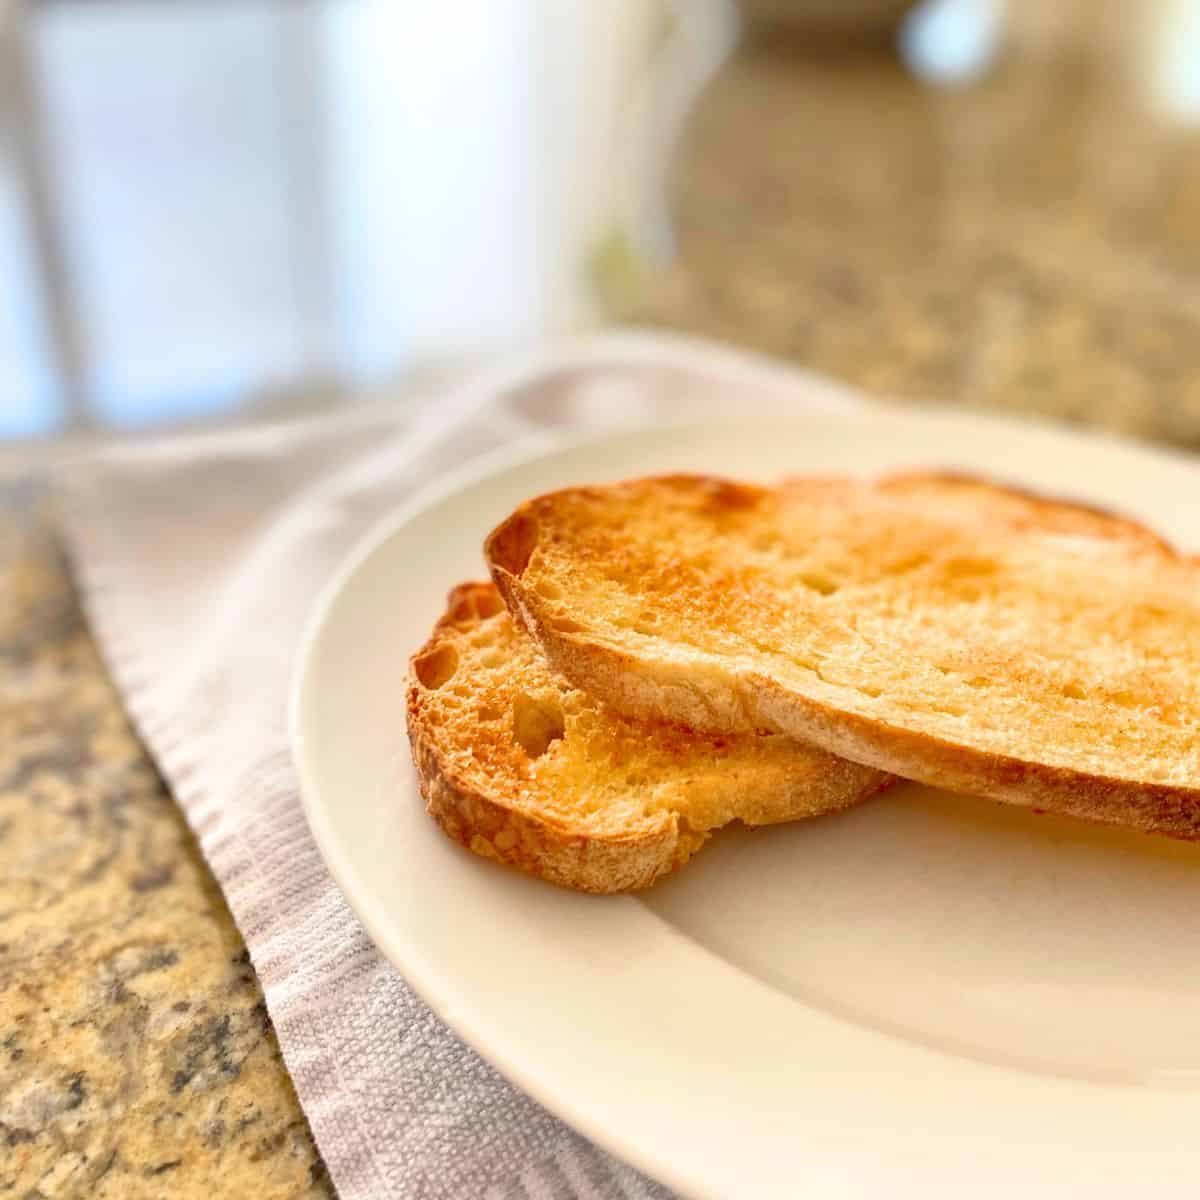 Homemade garlic bread roasted in the oven on a white dinner plate